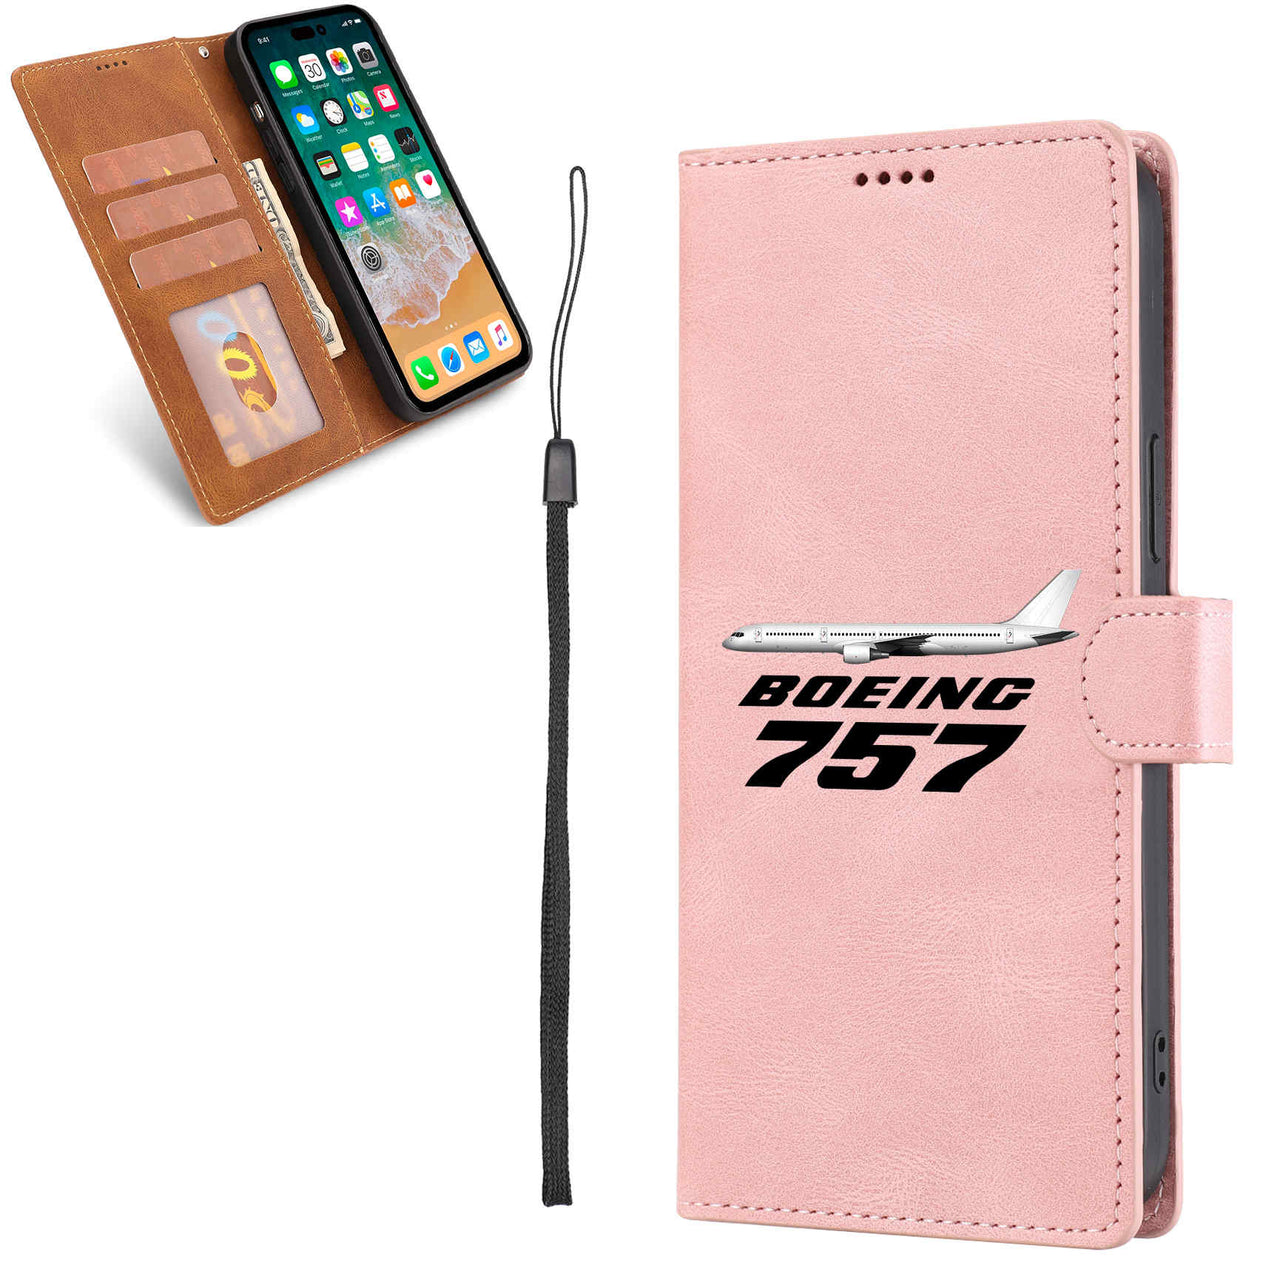 The Boeing 757 Designed Leather Samsung S & Note Cases